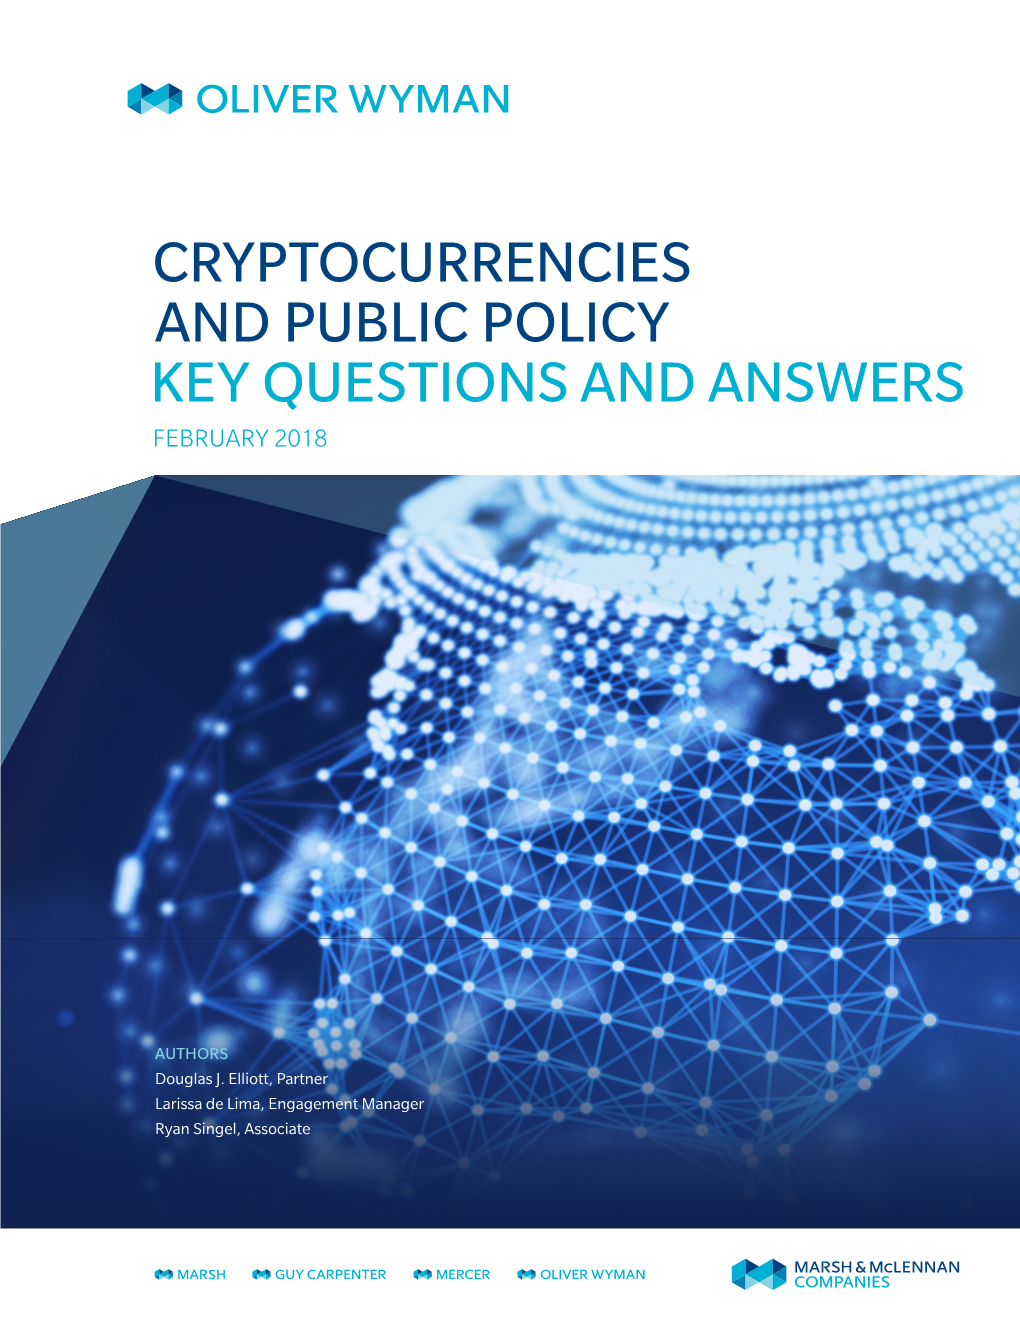 Cryptocurrencies and Public Policy – Key Questions